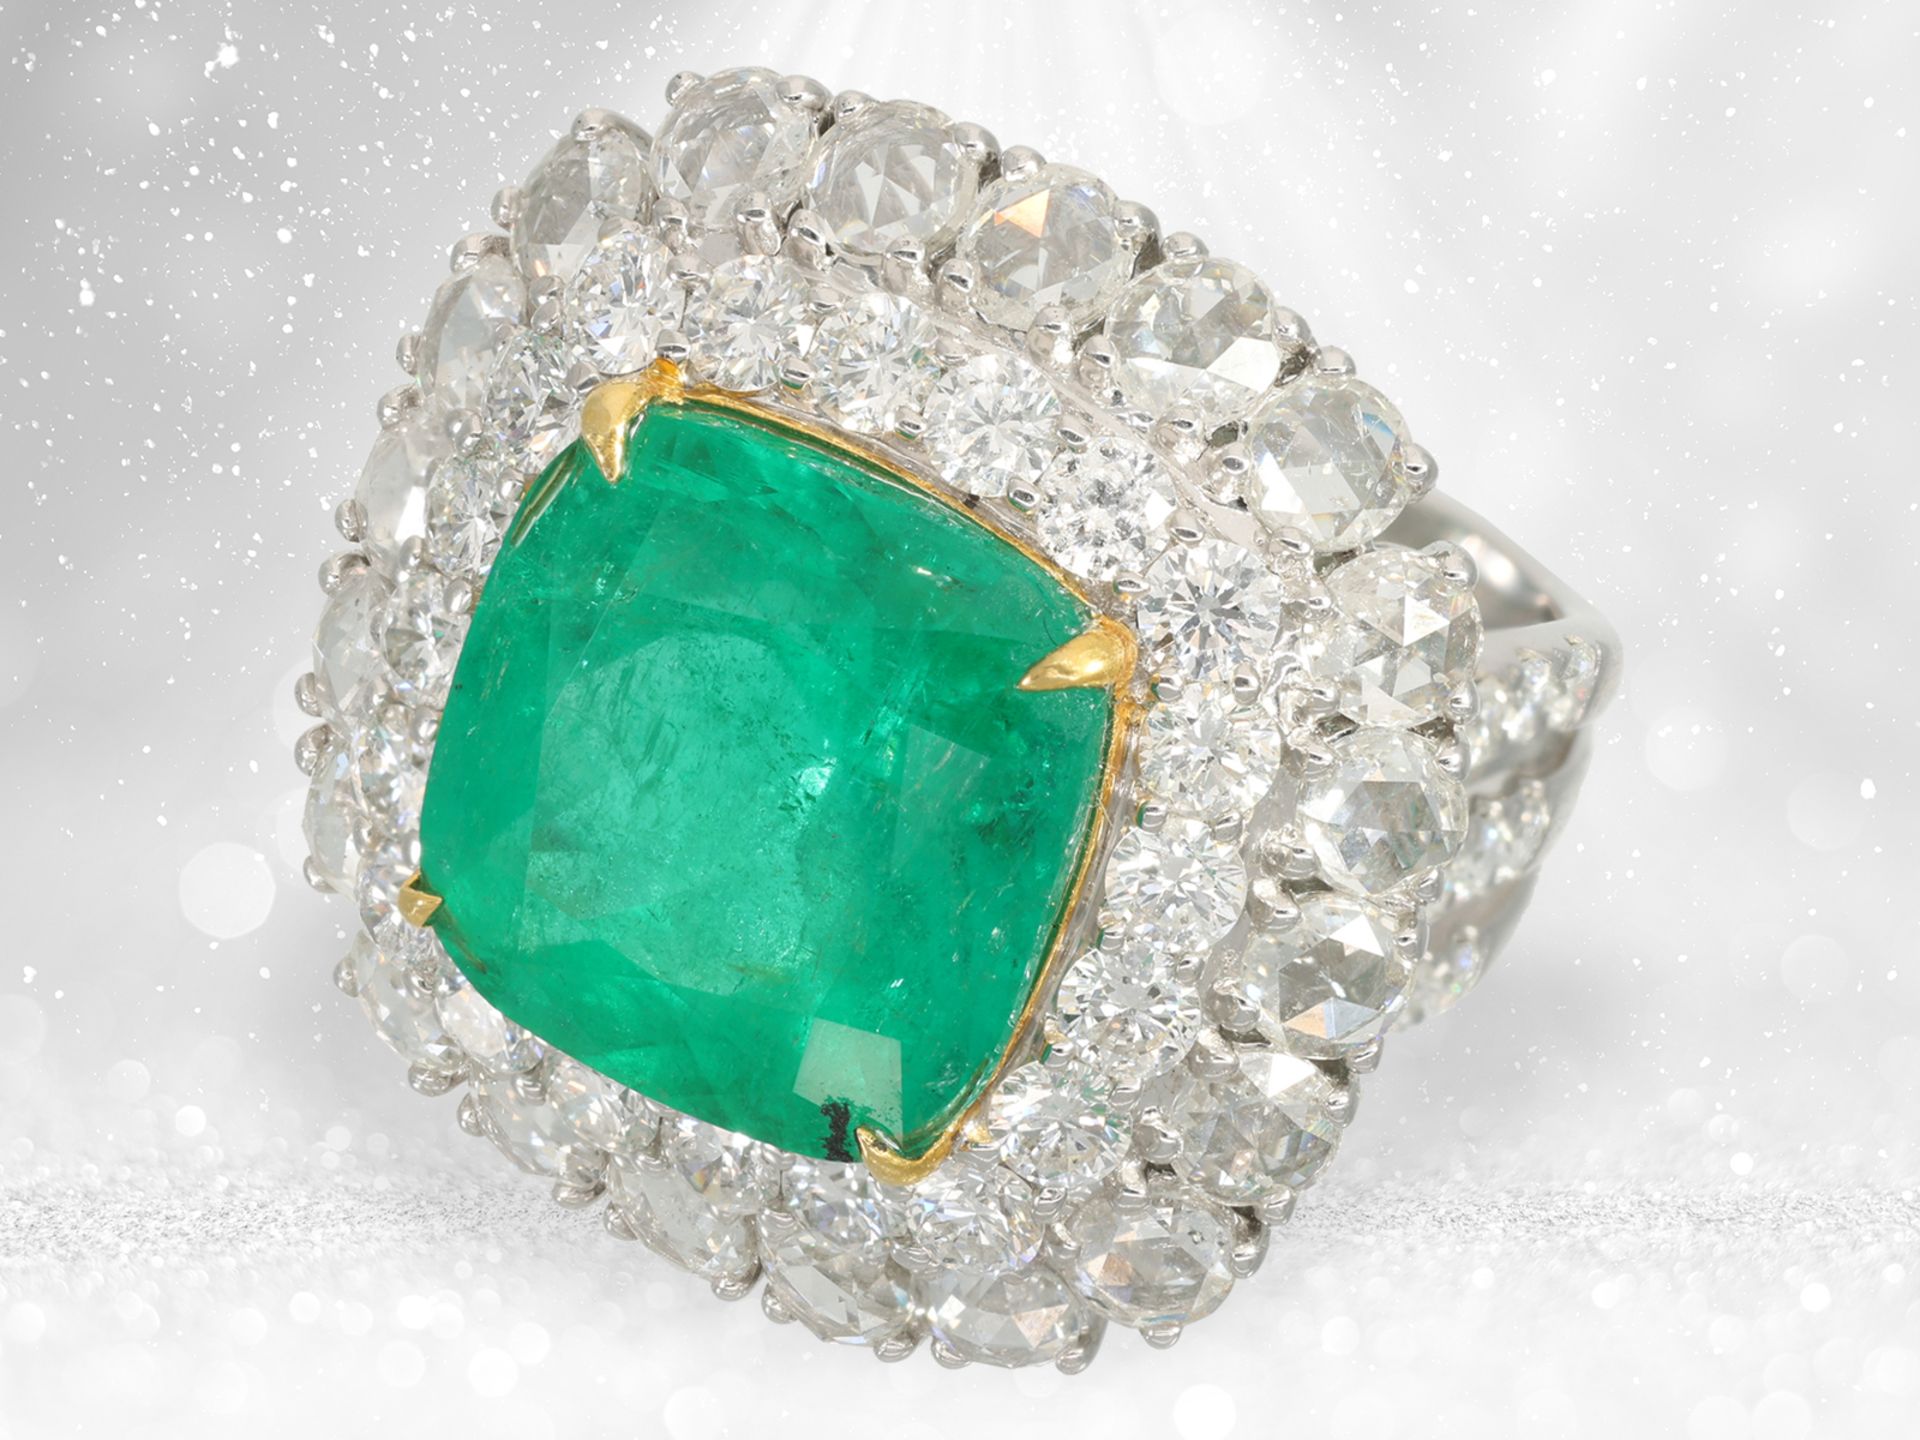 Ring: extremely high quality emerald ring, 11.32ct "Colombia - CE Insignificant", GRS report